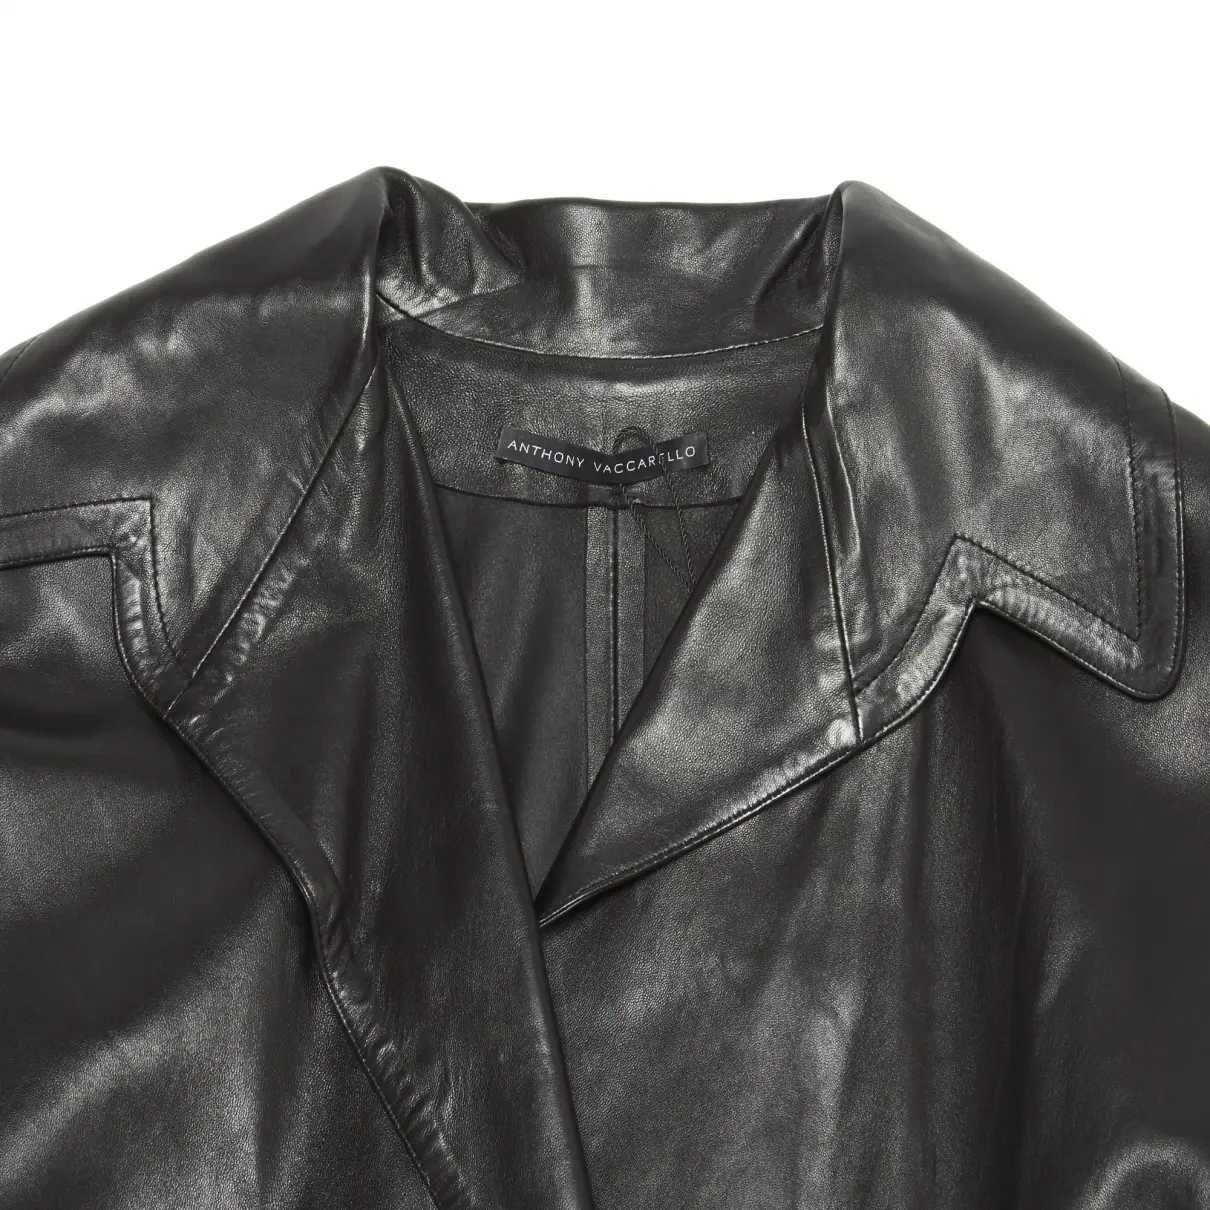 Anthony Vaccarello Leather mini dress for sale